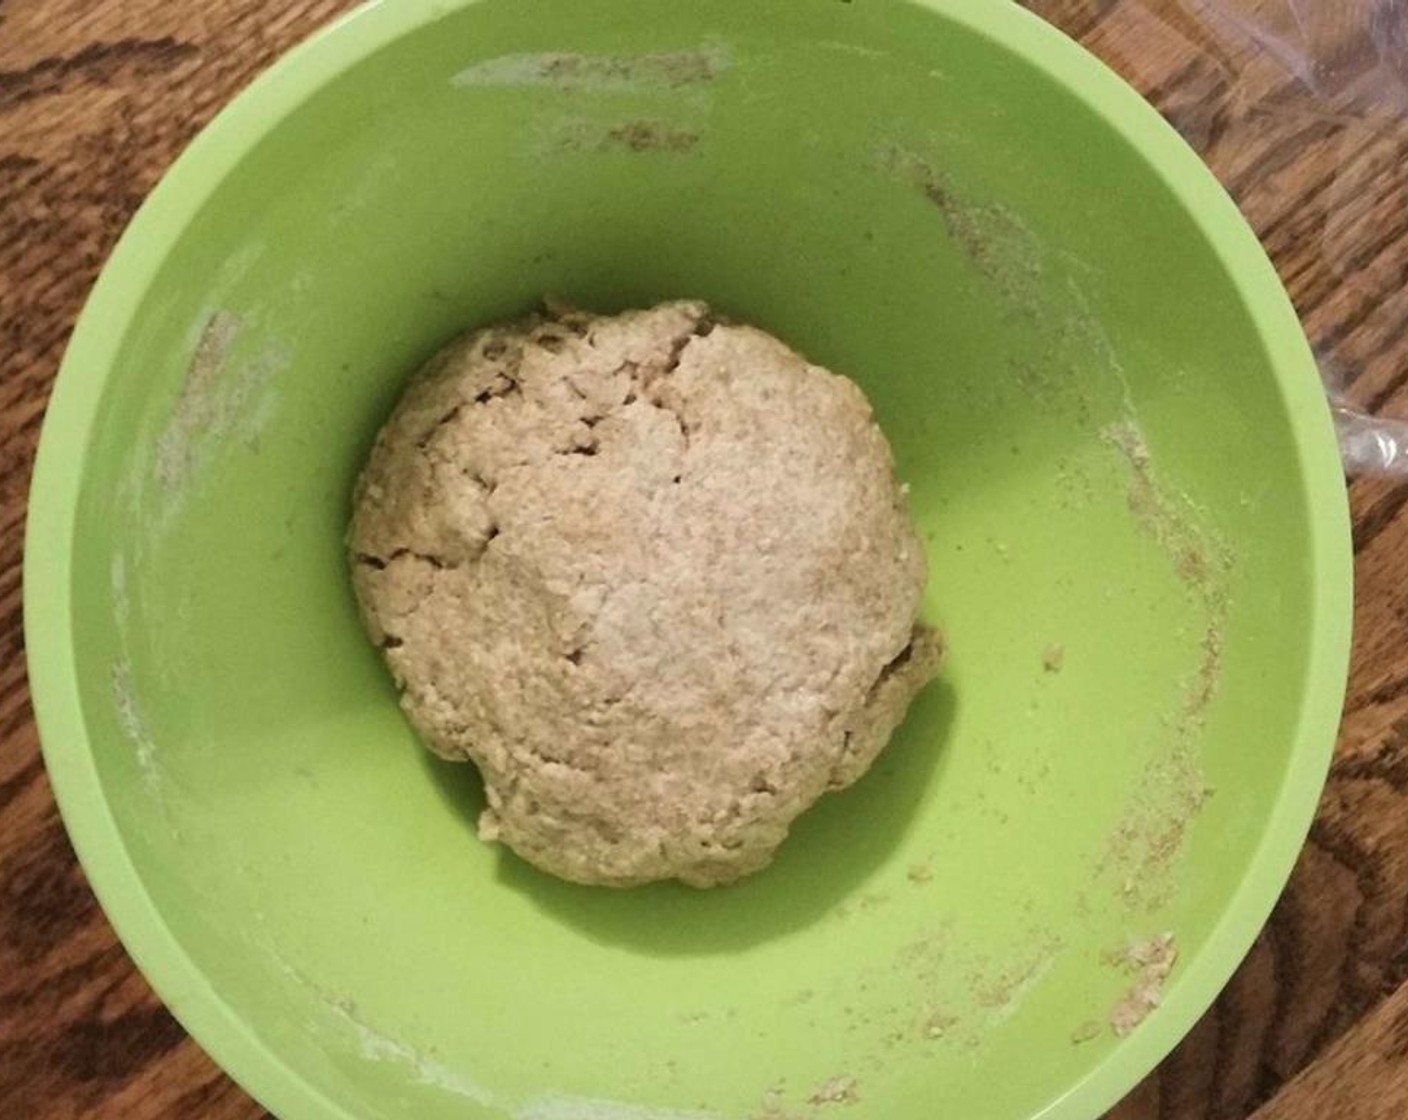 step 2 Add Olive Oil (1/2 Tbsp), and then add Water (2/3 cup), a little at a time so that the dough holds, until soft dough forms. Cover and place in refrigerator for a minimum of 24 hours and a maximum of 3 days.